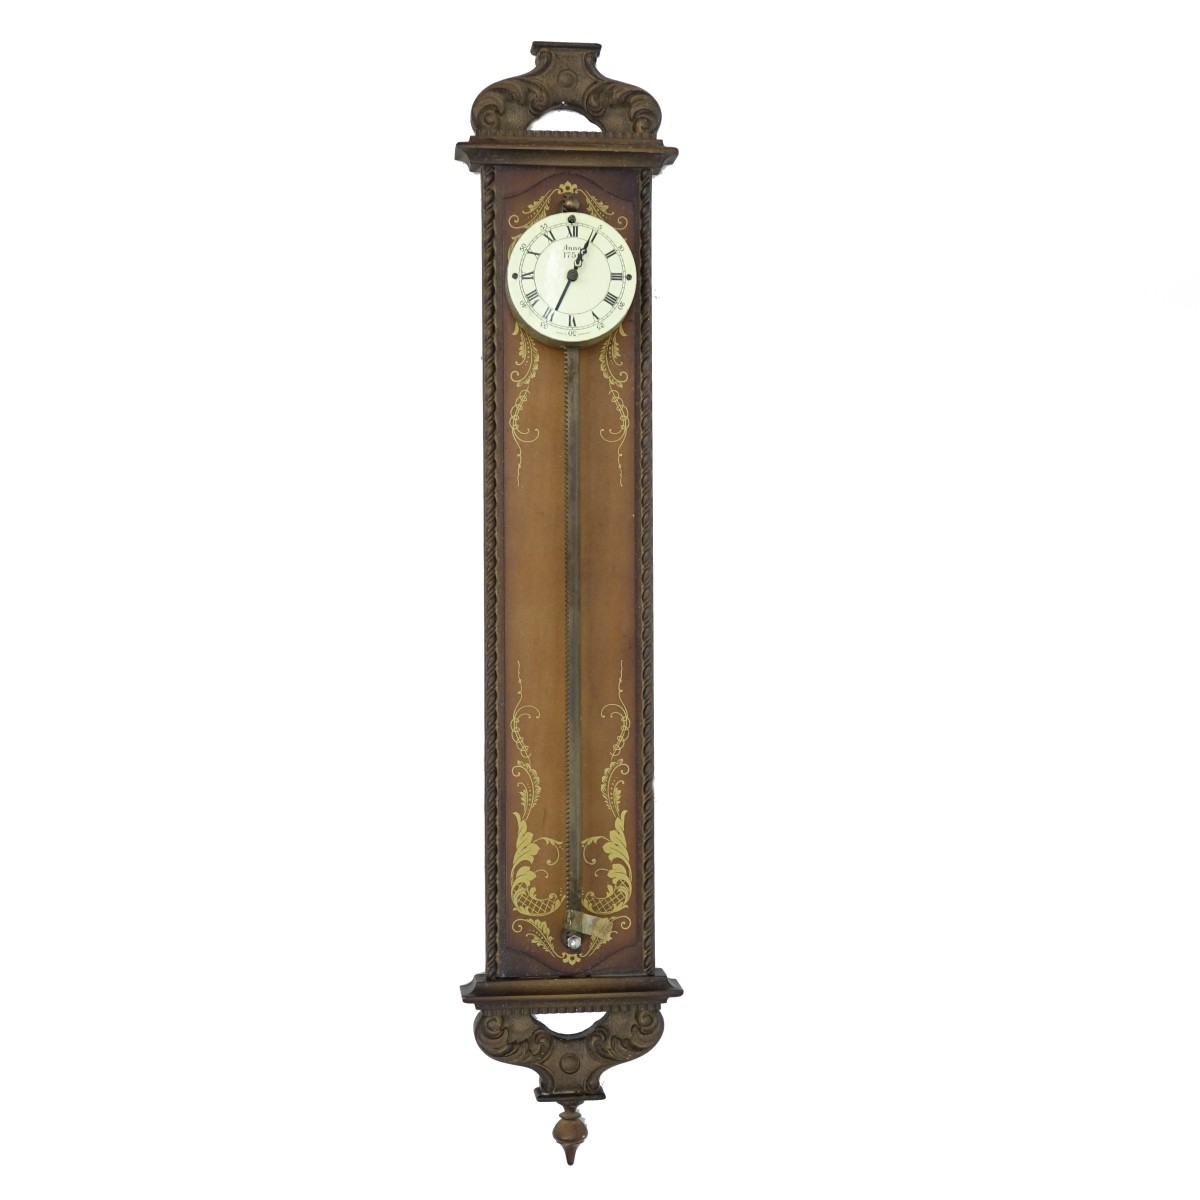 Anno 1750 Saw Tooth Gravity Clock